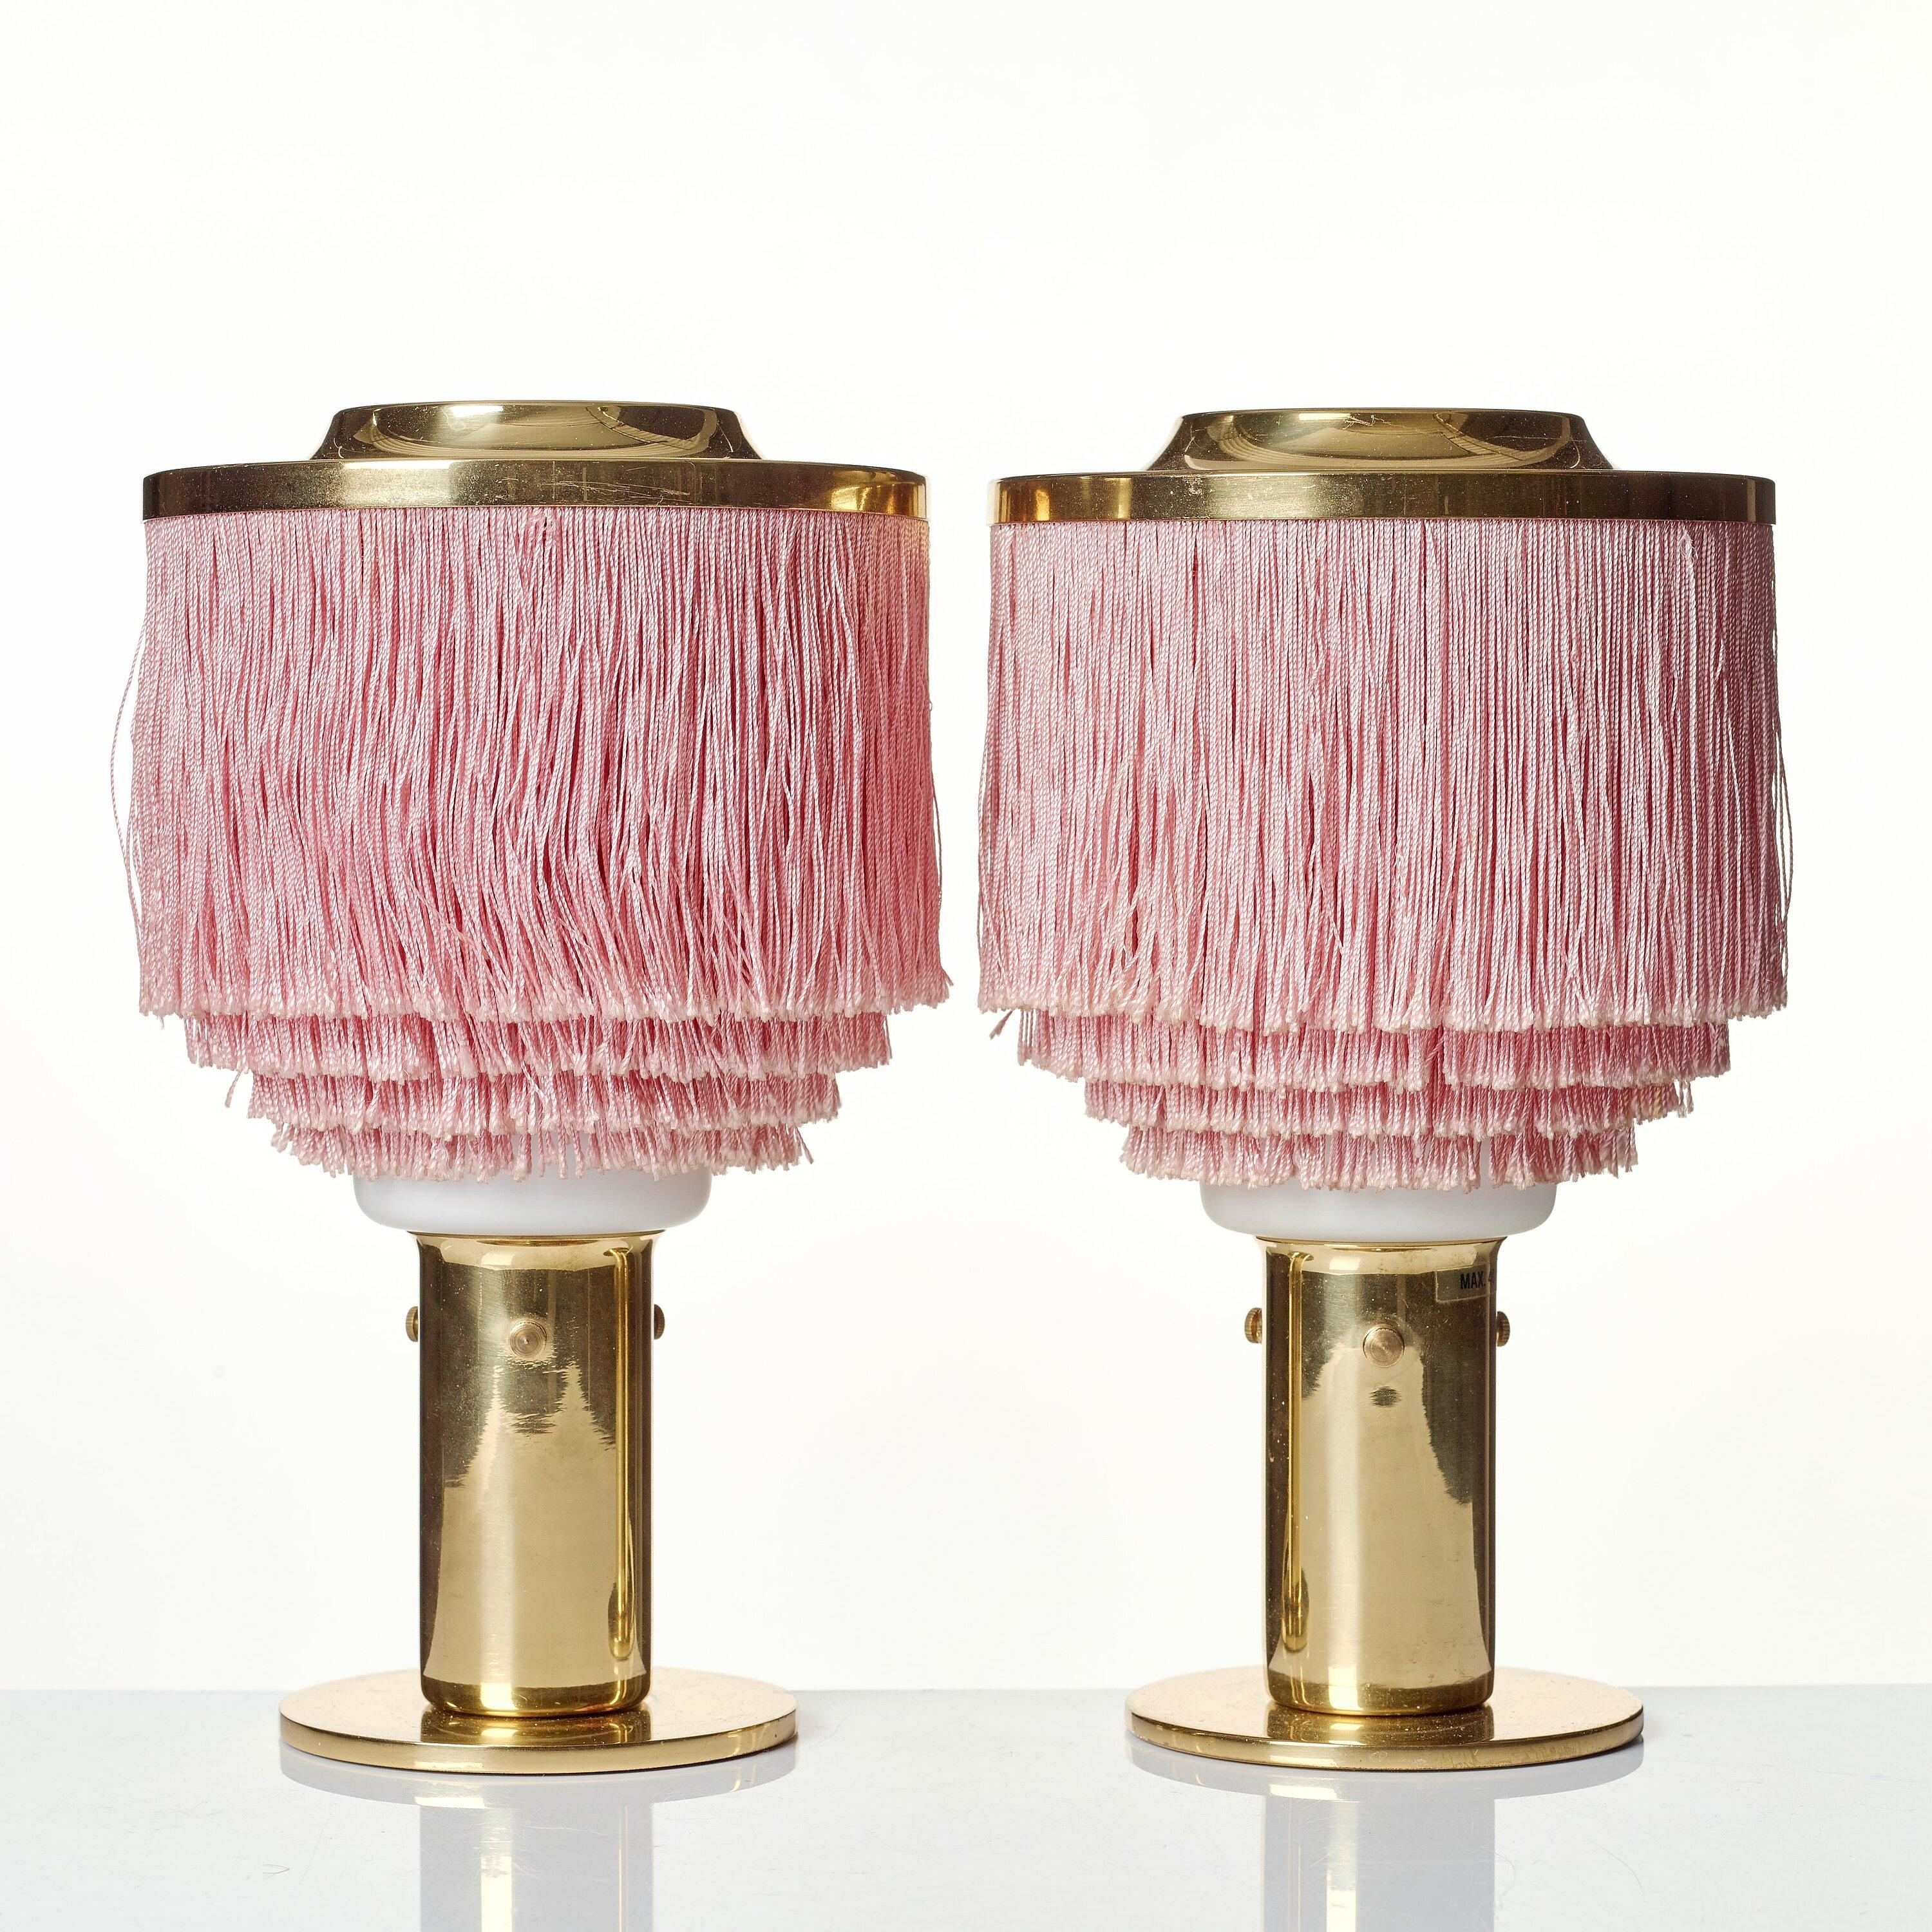 A beautiful pair of table lamps designed by Hans-Agne Jakobsson & manufactured by HAJ AB in Markaryd, Sweden, 1960s.
Pink silk fringes, brass and white glass.
Both signed to the underside.
Very good vintage condition.